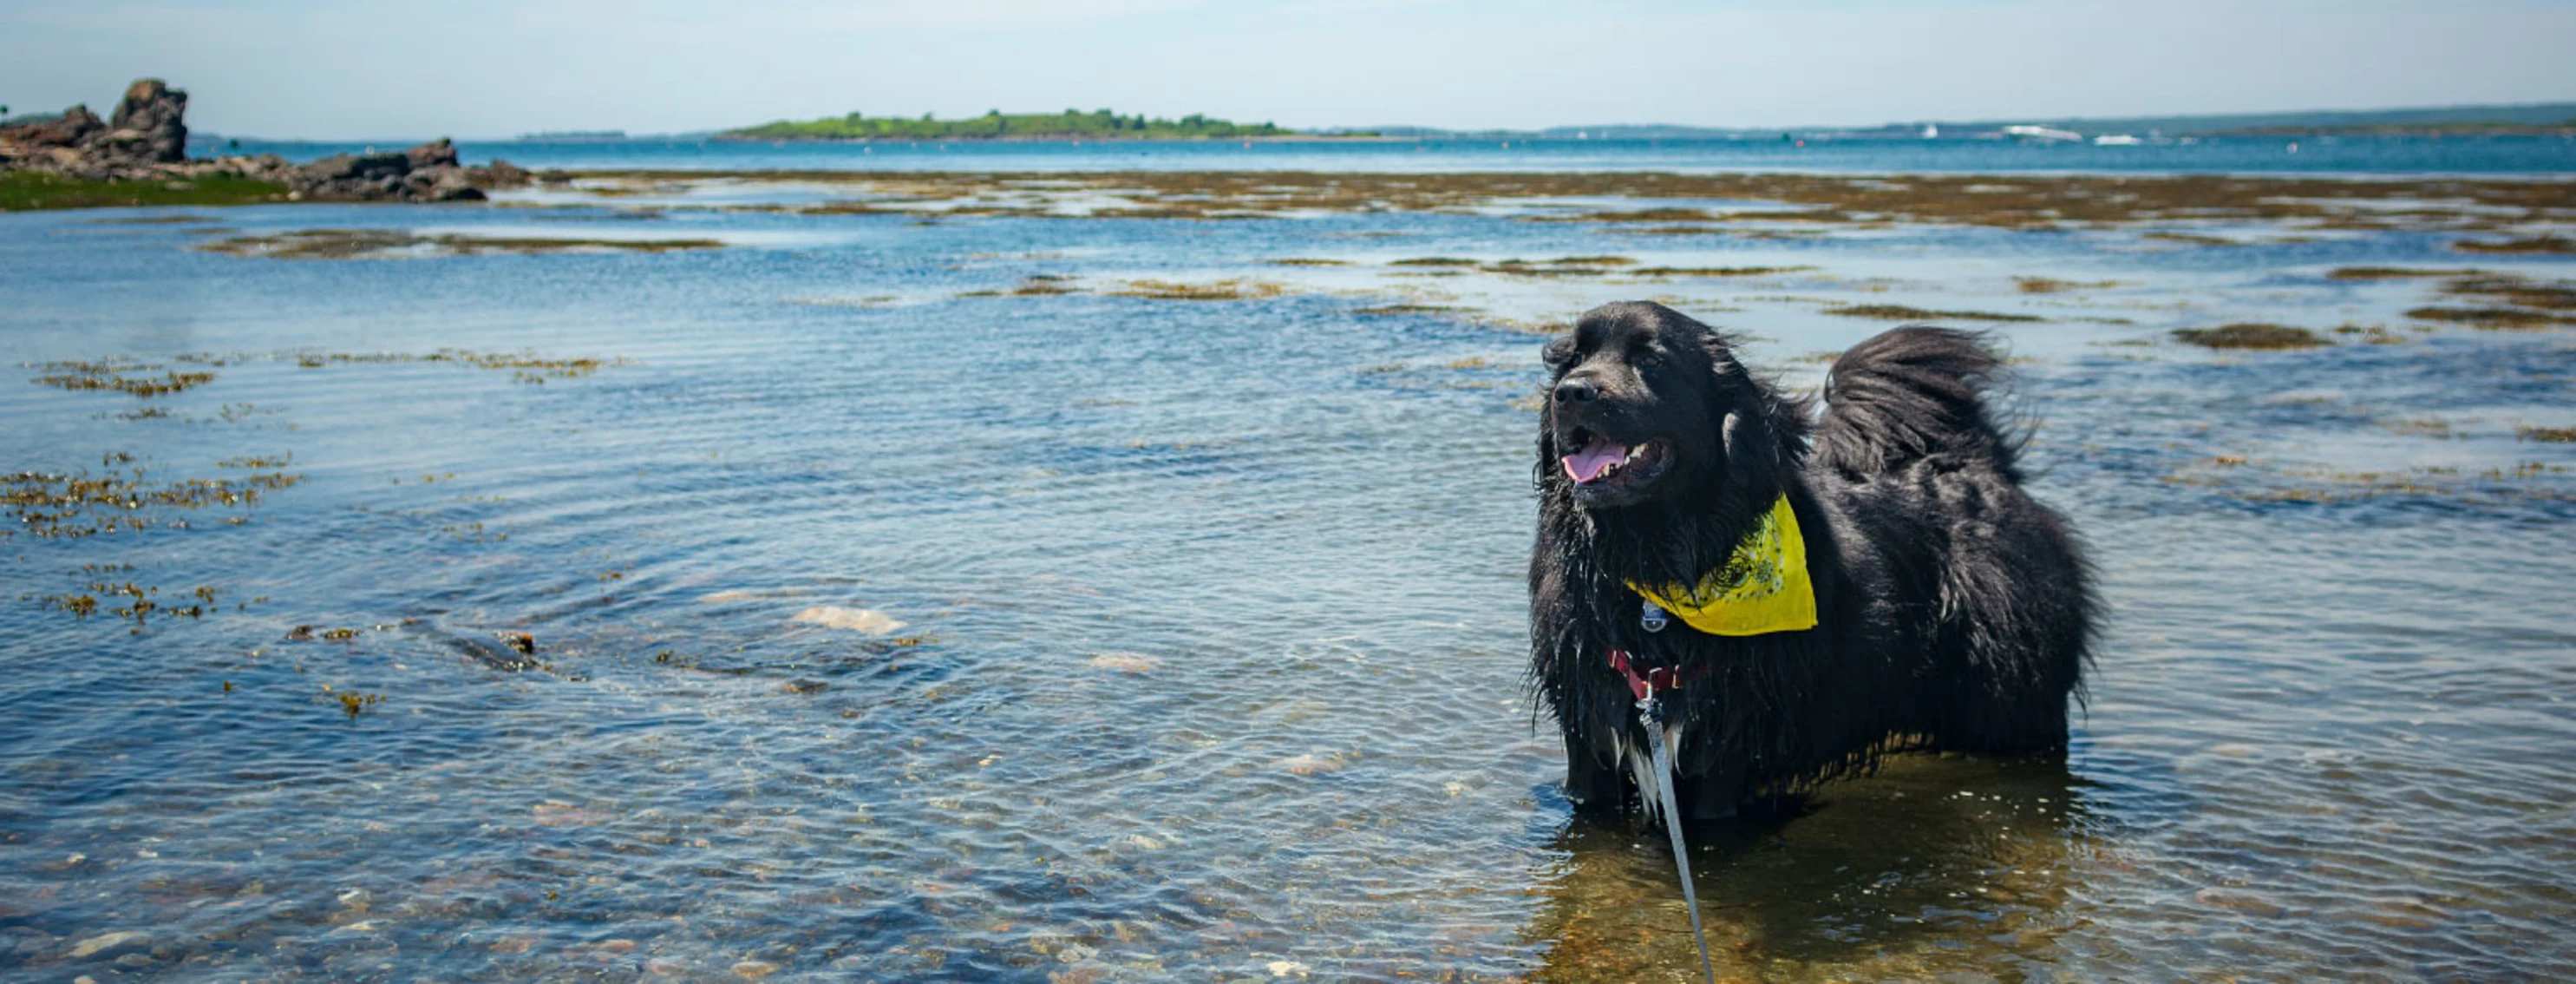 Black newfoundland dog standing in shallow water in New England Region of the United States